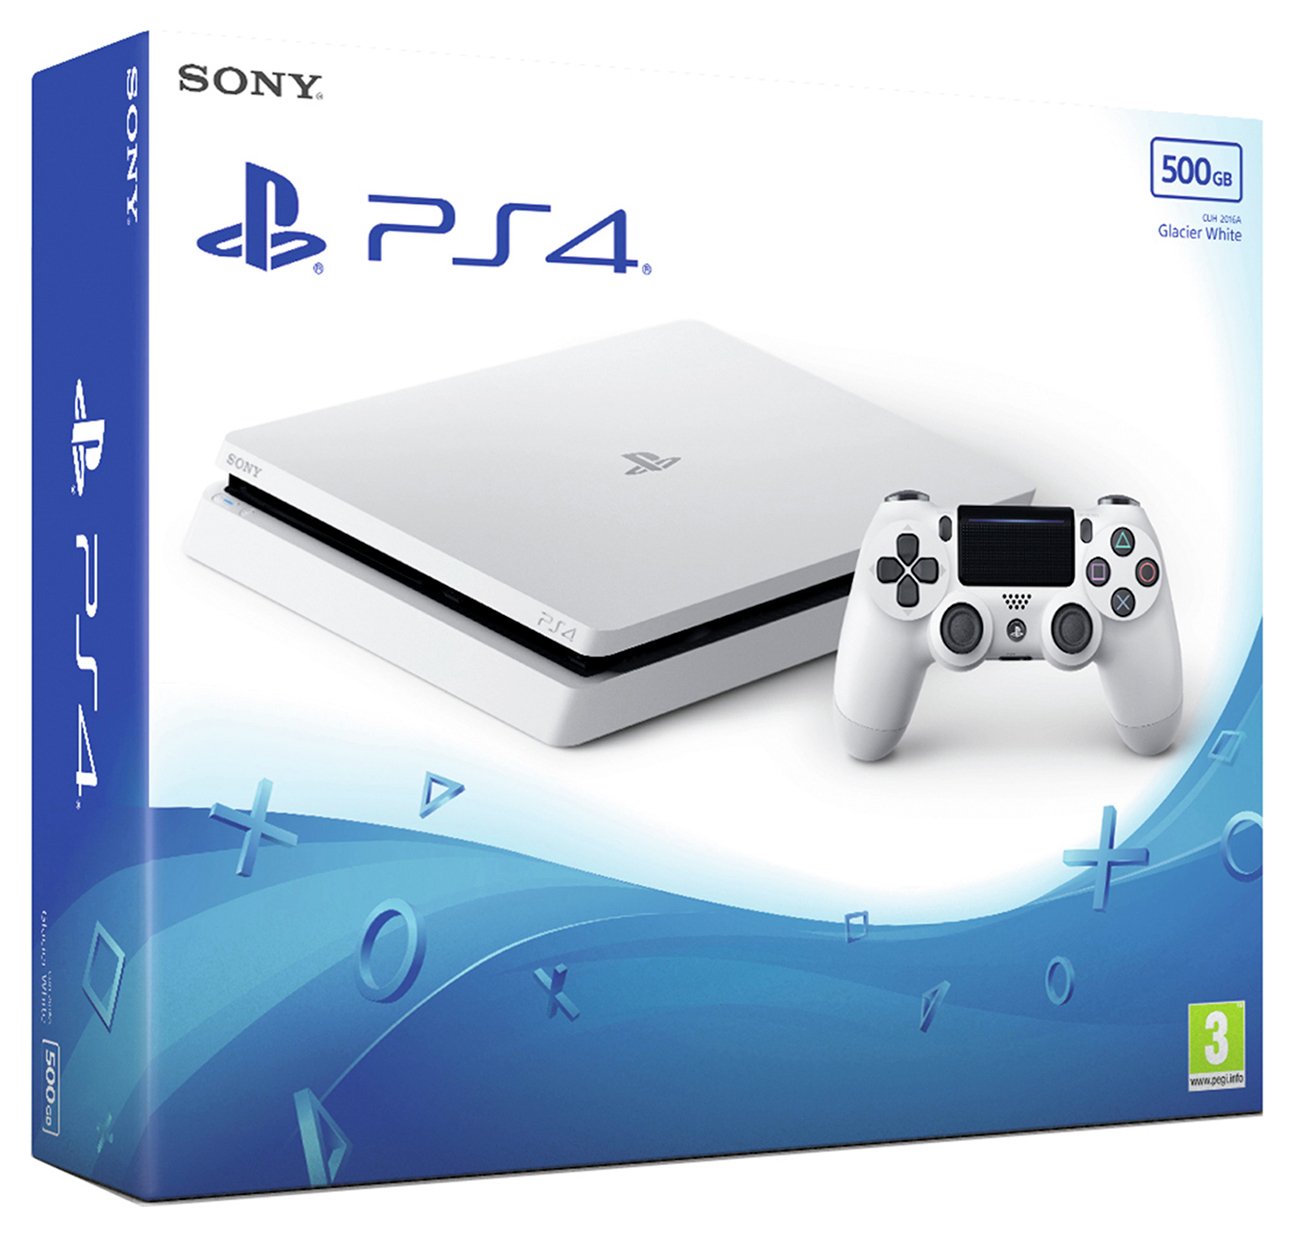 Sony PS4 500GB Console - White